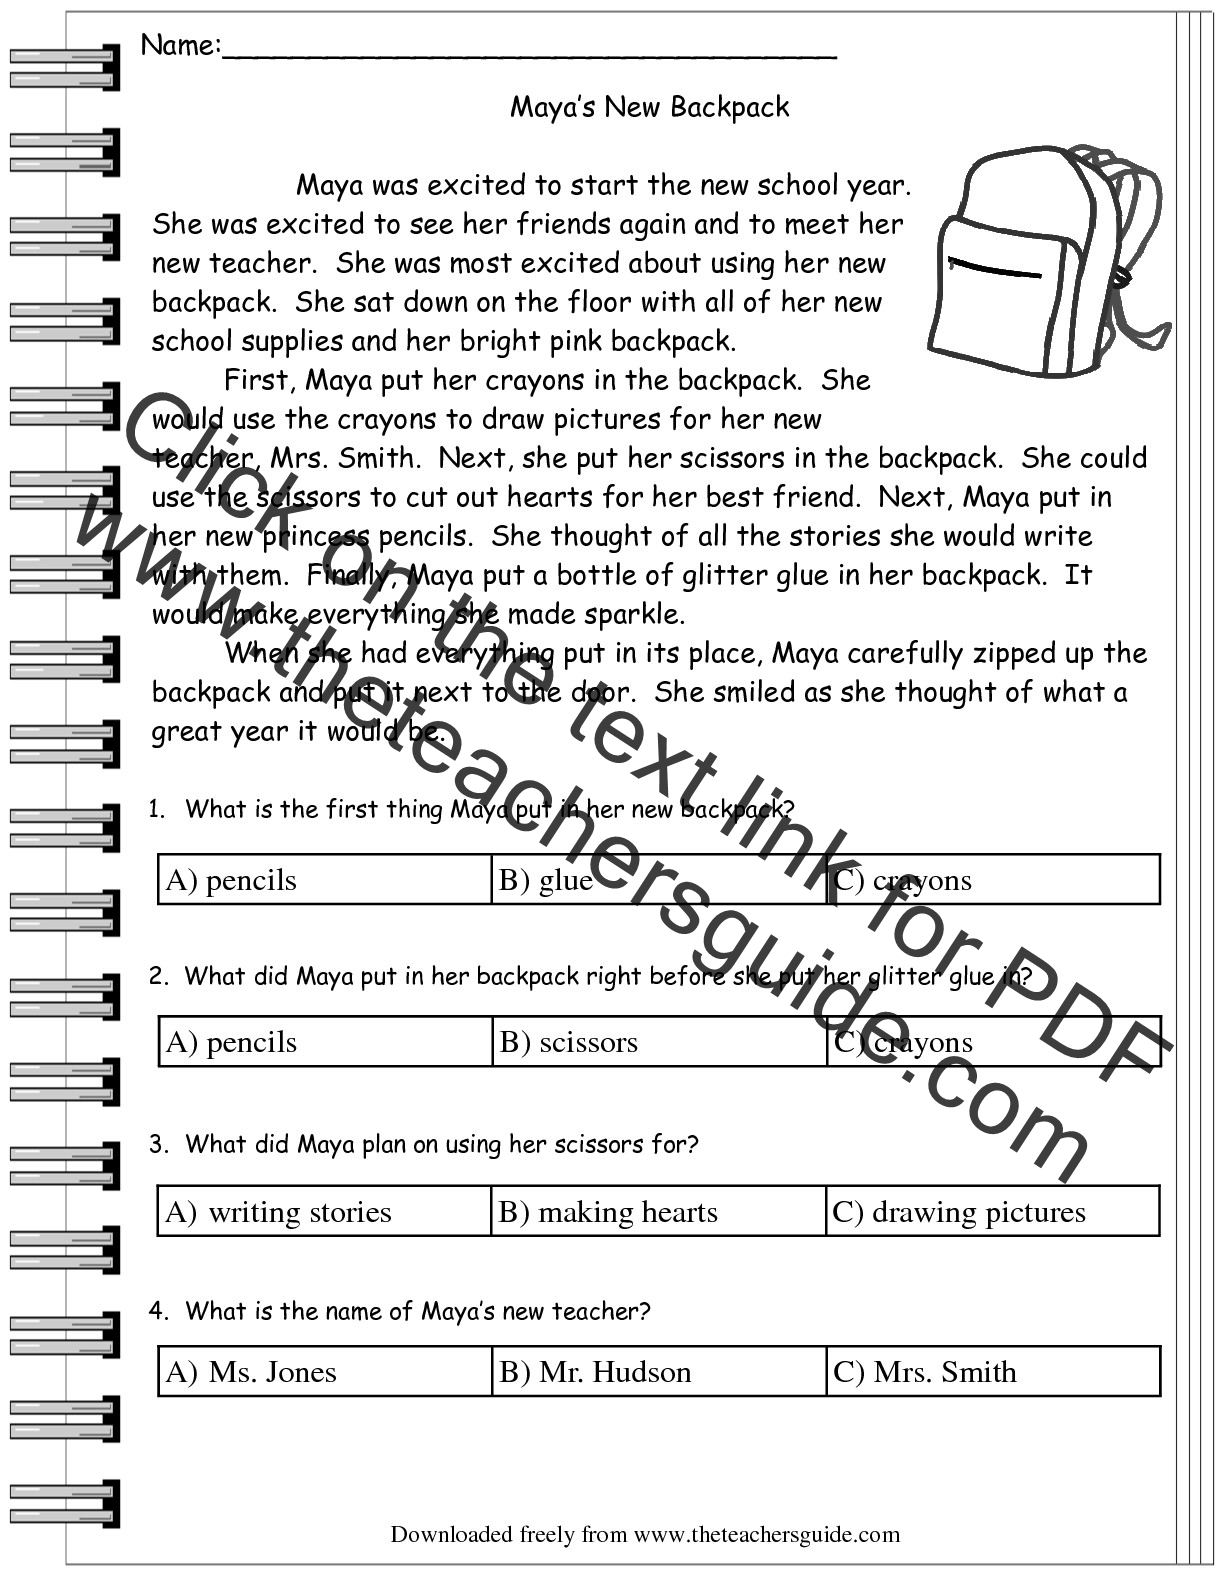 printable-reading-comprehension-worksheets-5th-grade-multiple-choice-tutore-org-master-of